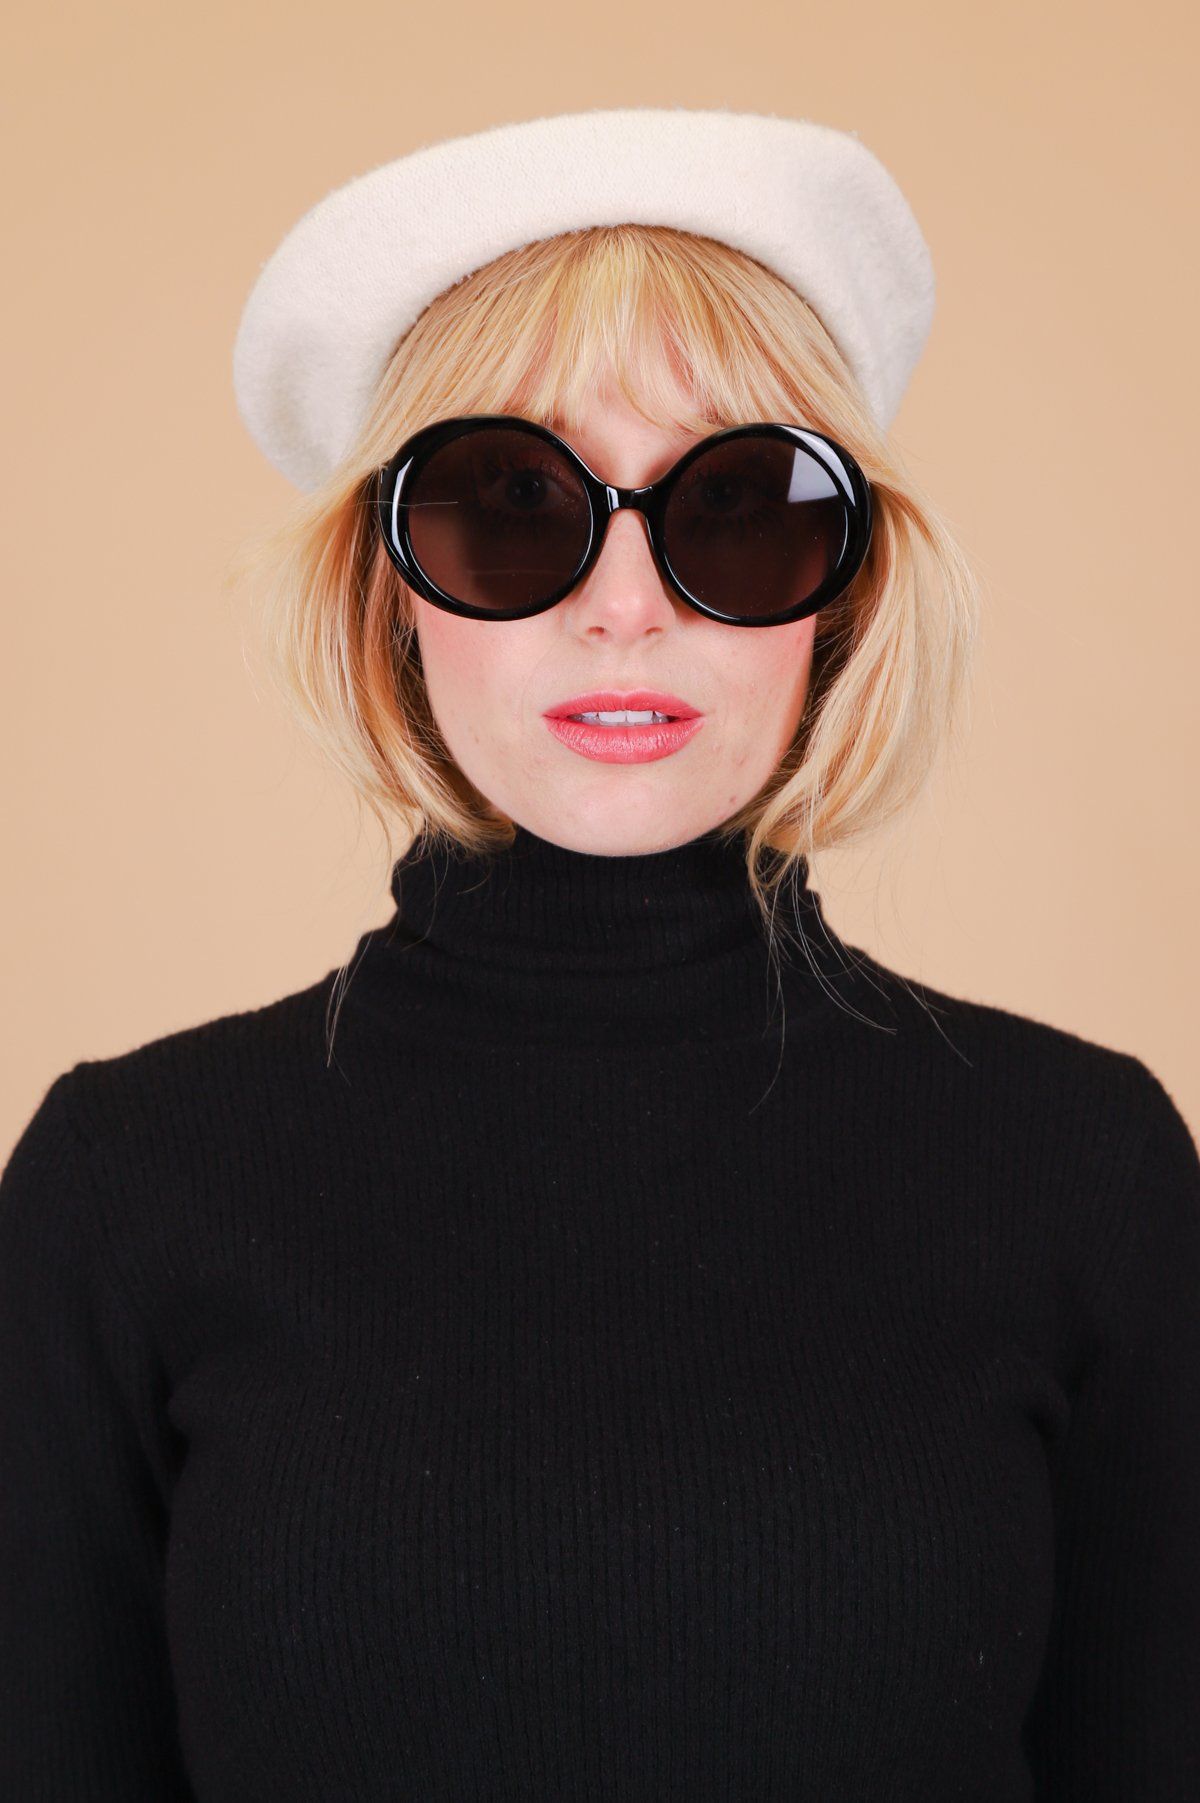 Sunny Days Ahead: Embrace Style with Chic Round Sunglasses